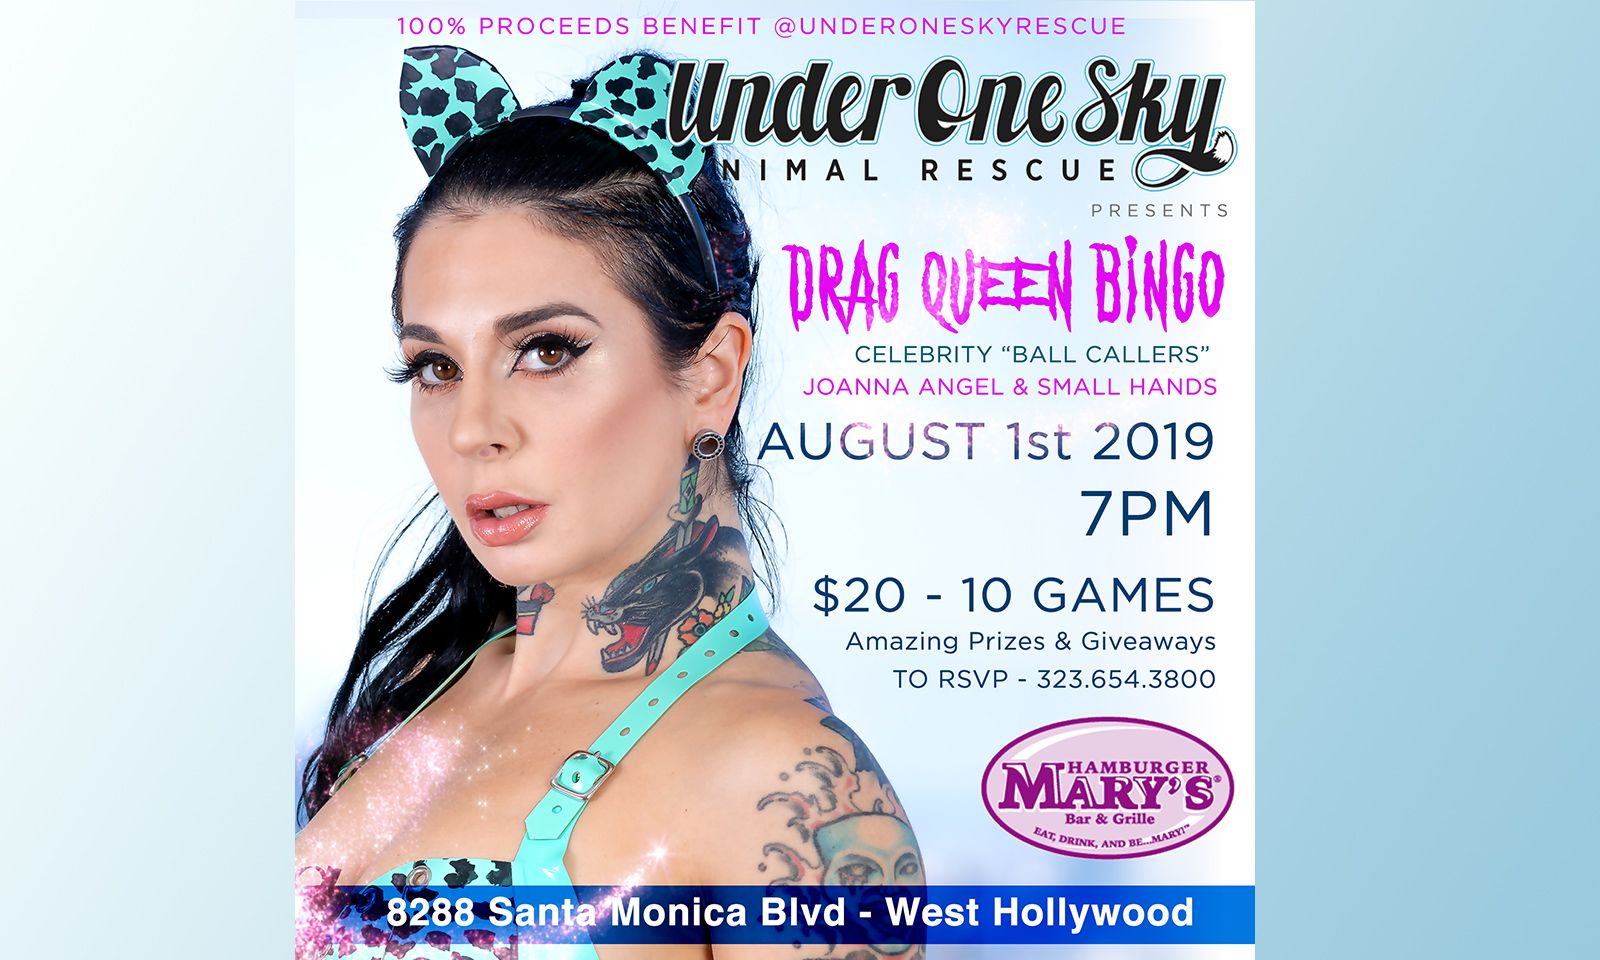 Joanna Angel & Small Hands To Host Animal Rescue Charity Event